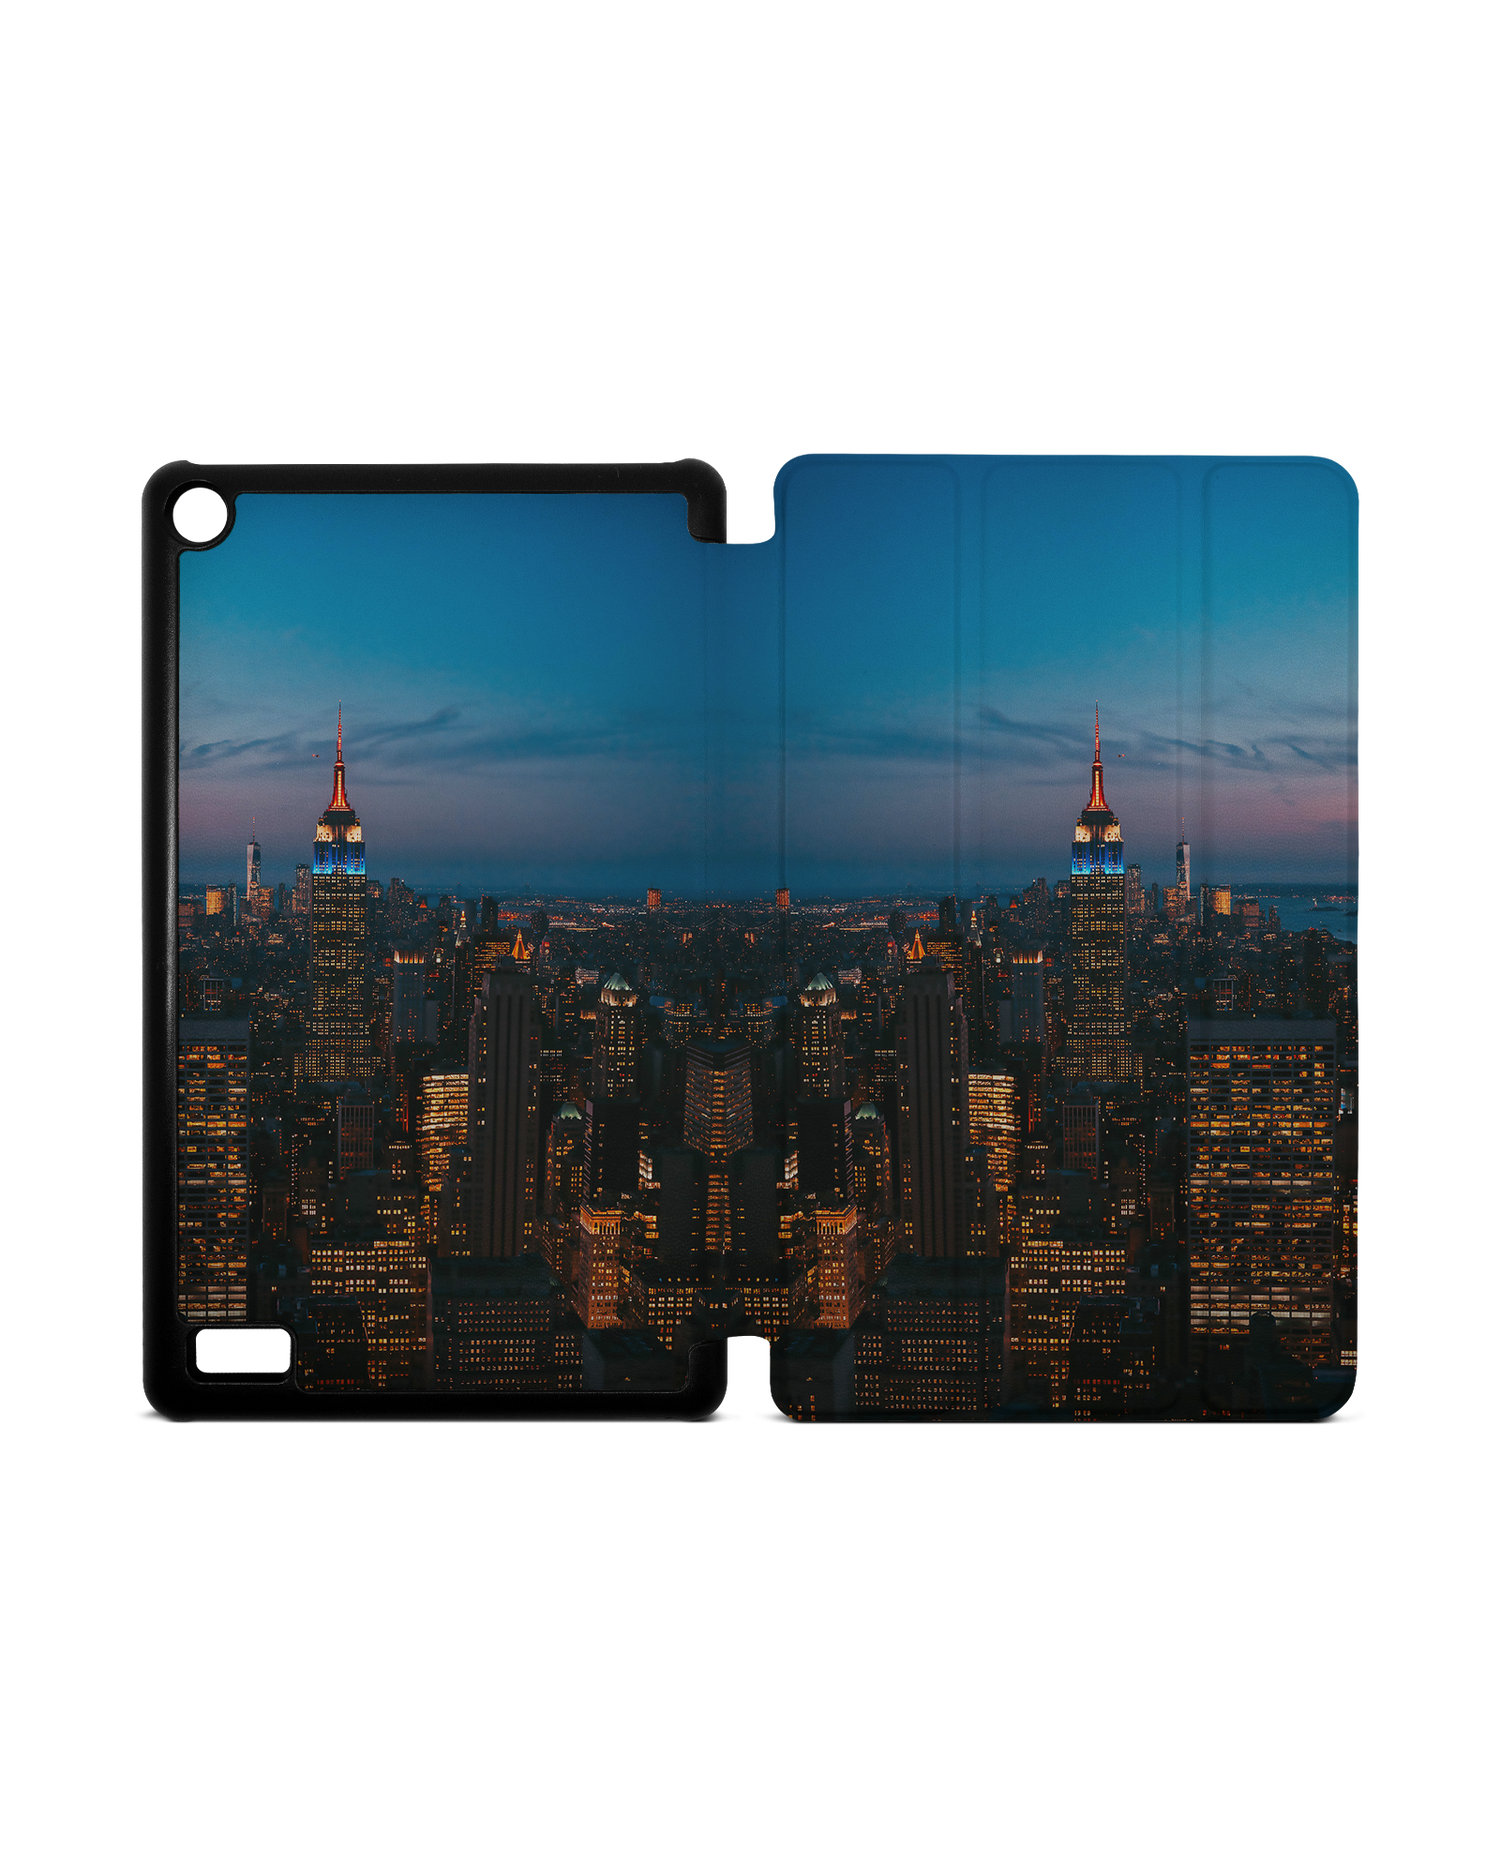 New York At Dusk Tablet Smart Case for Amazon Fire 7: Opened